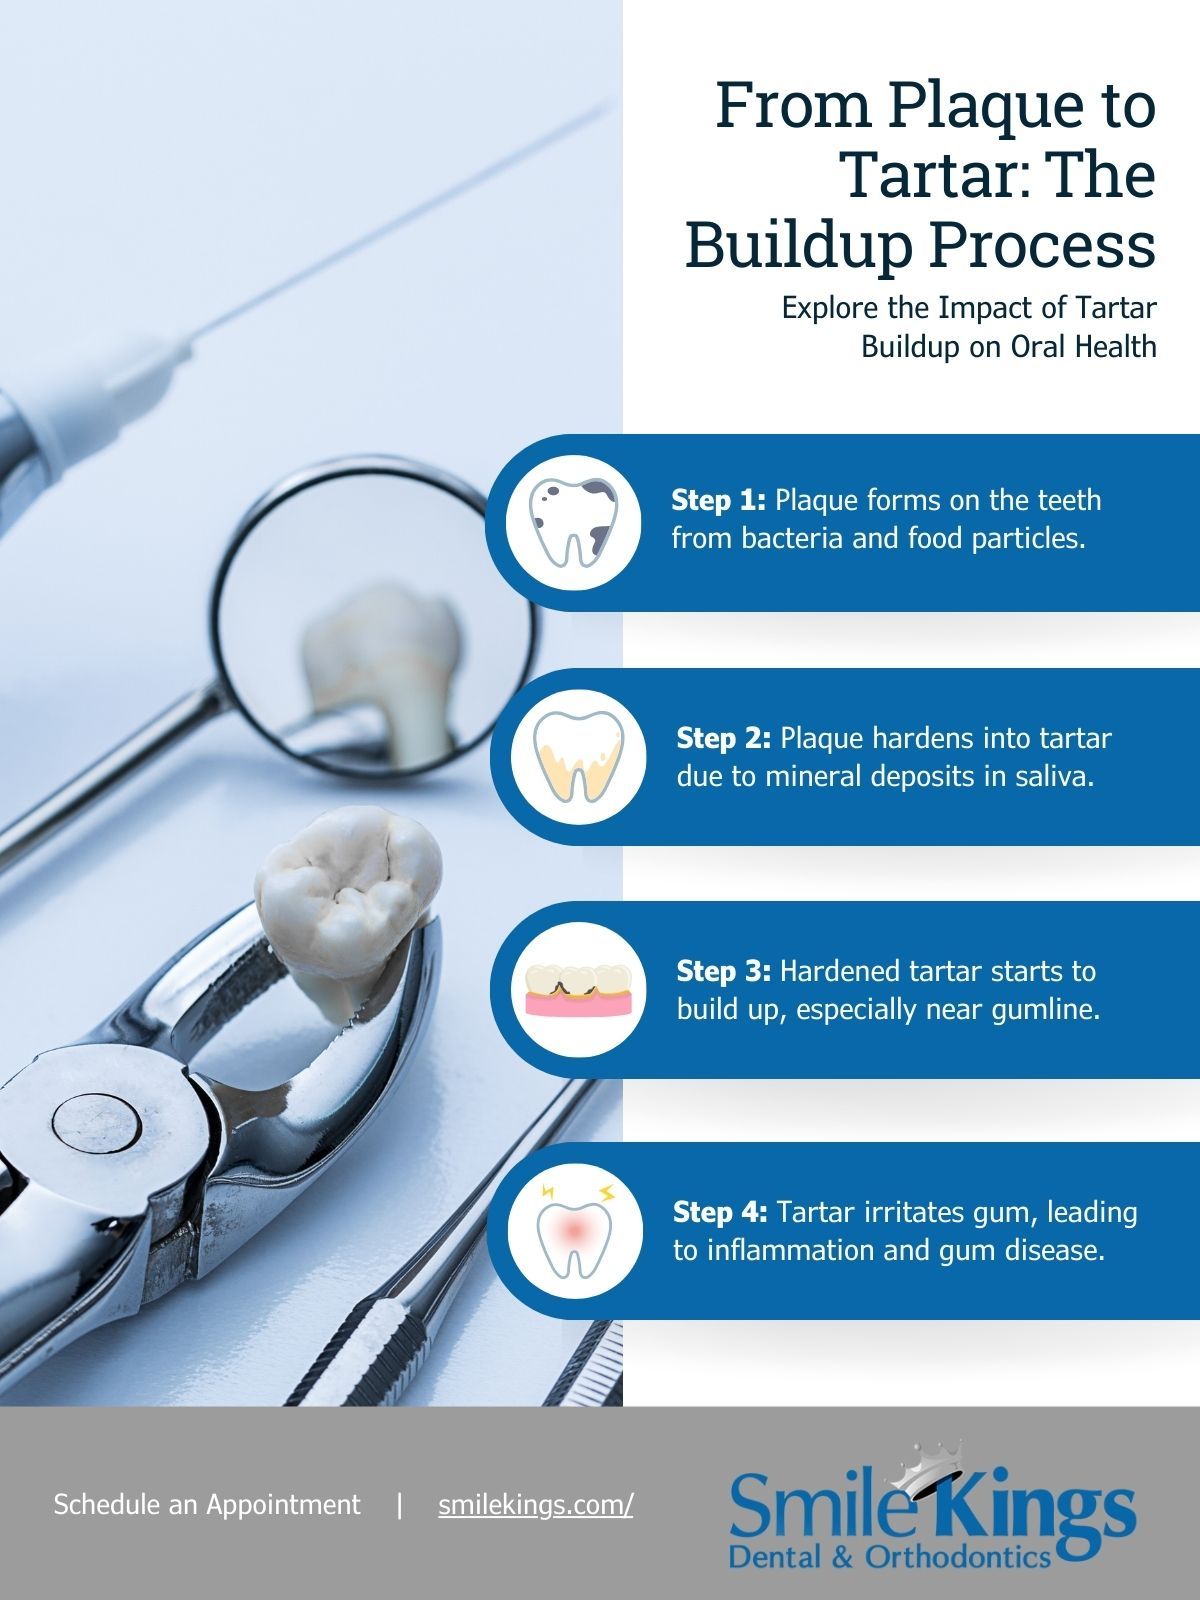 M38685 - Infographic - From Plaque to Tartar The Buildup Process.jpg